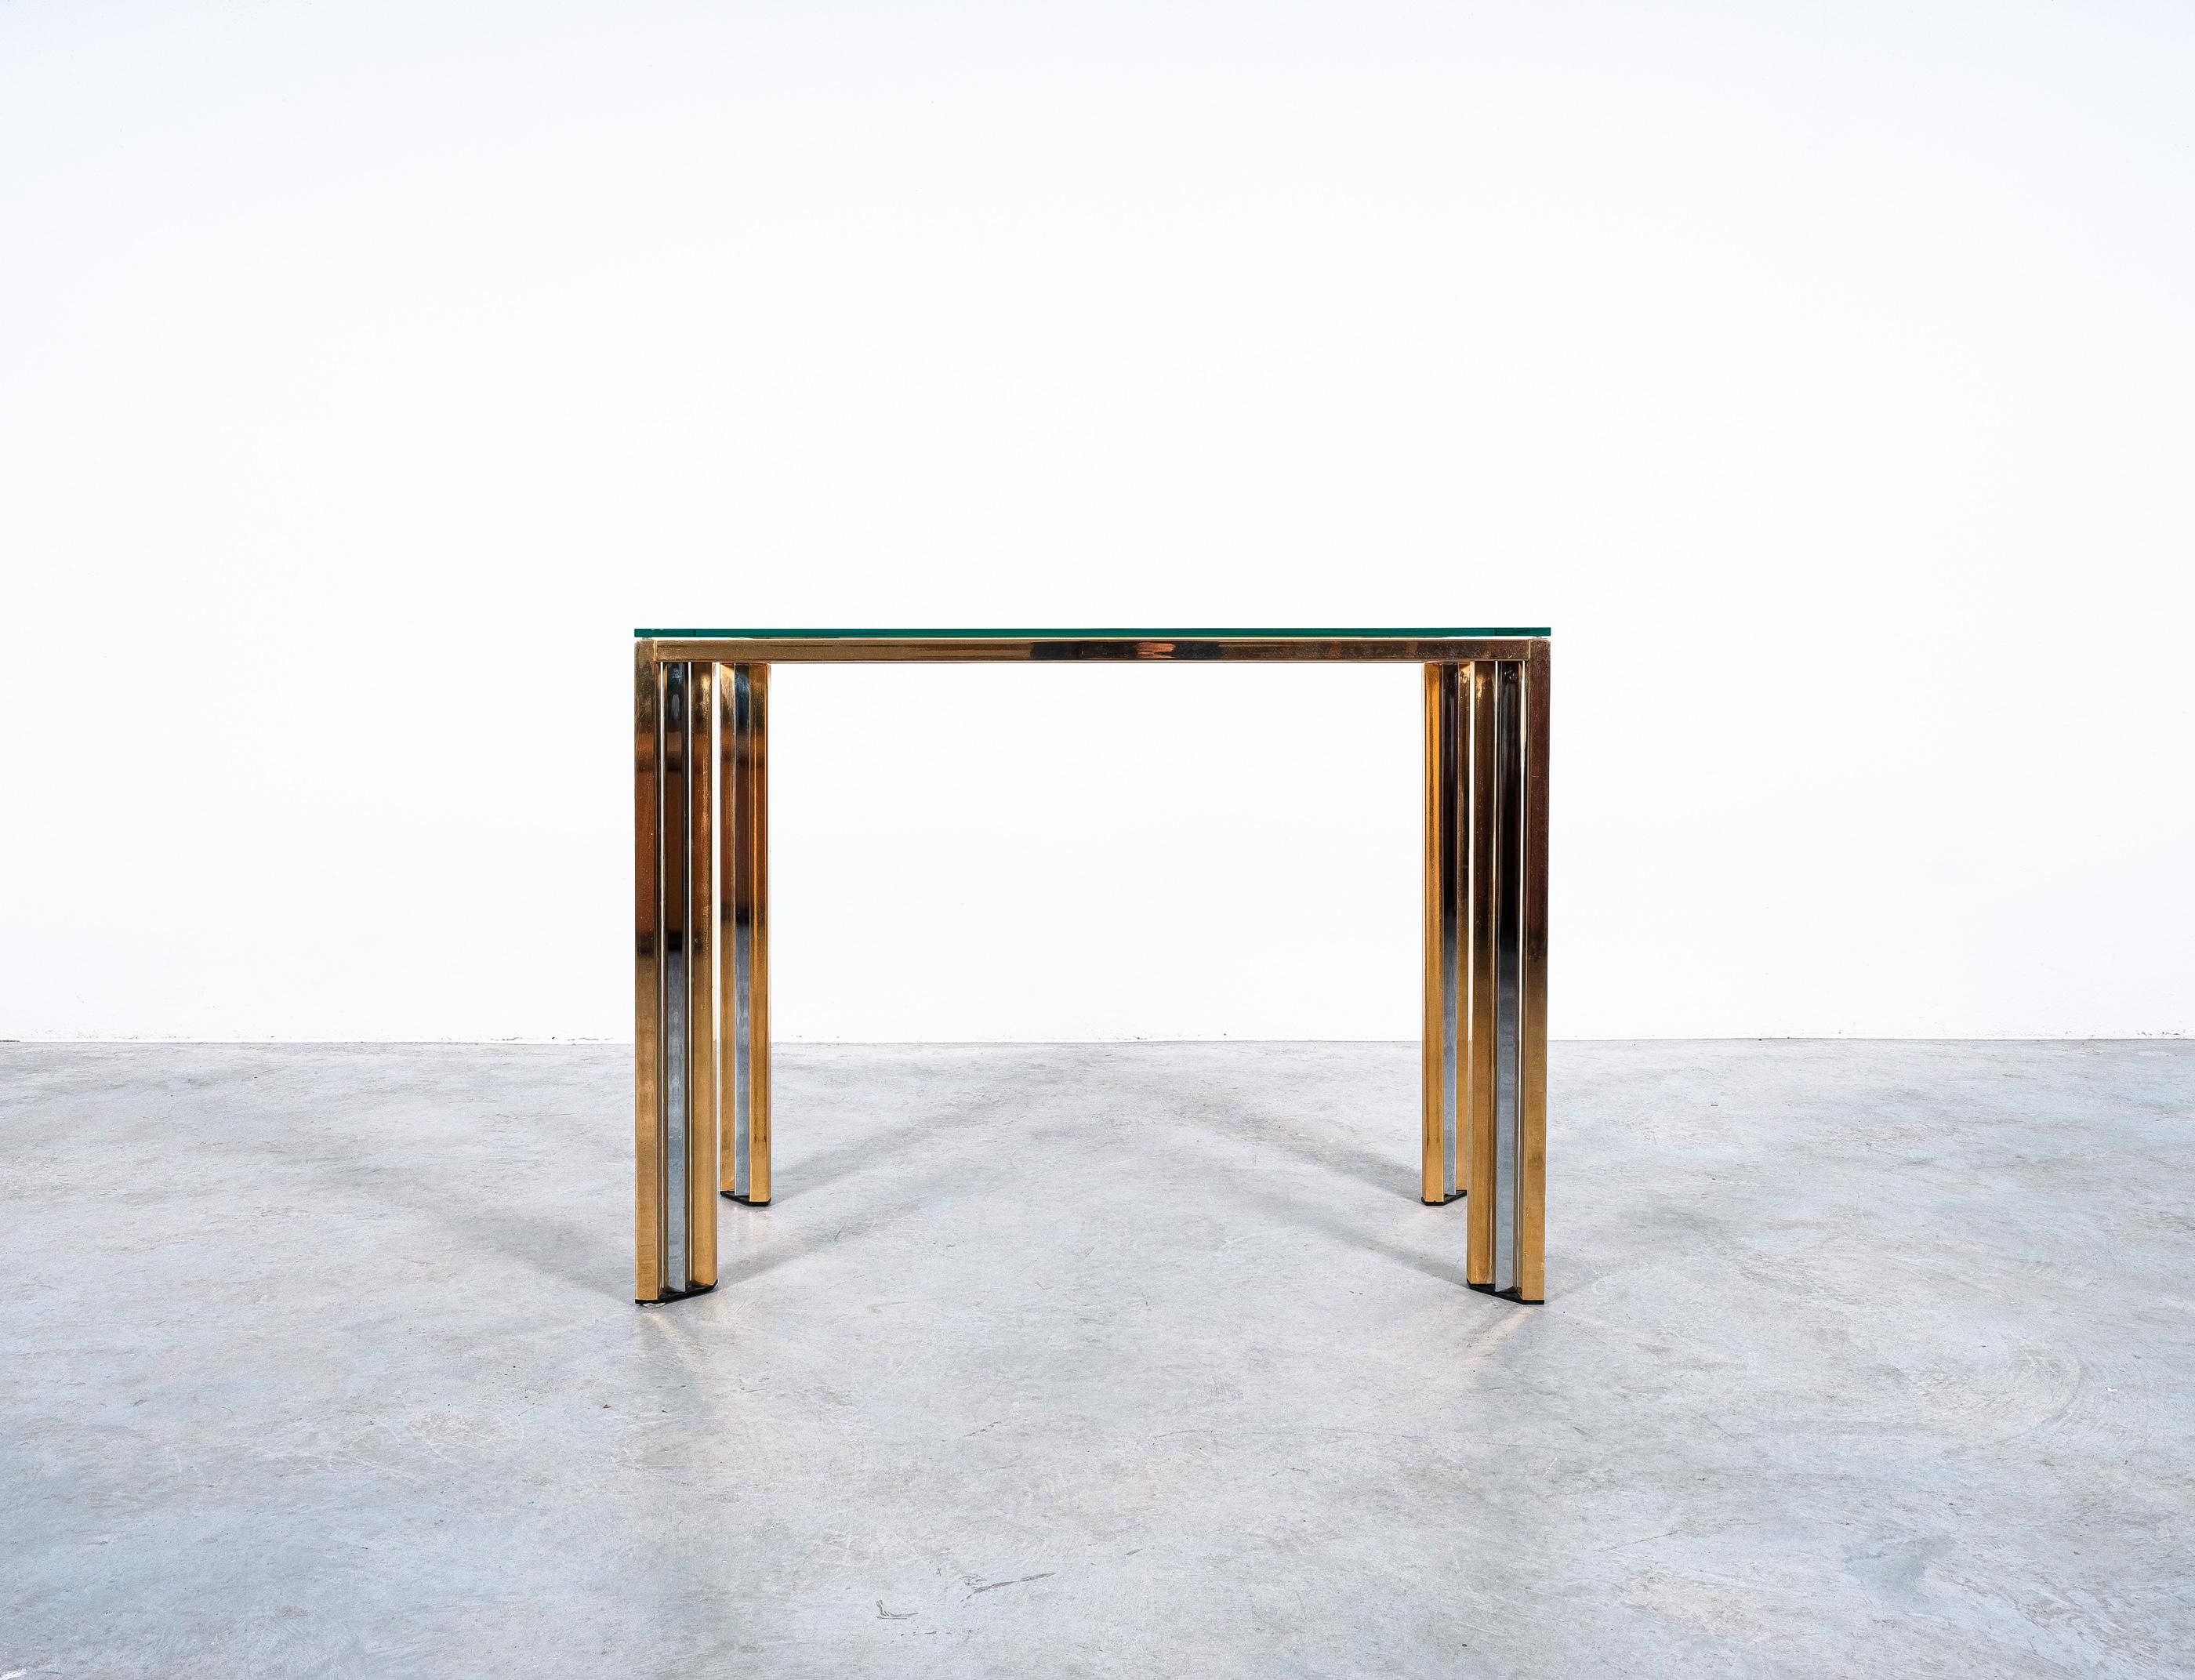 Brass and Glass Console Table Romeo Rega, Italy, 1970 For Sale 3